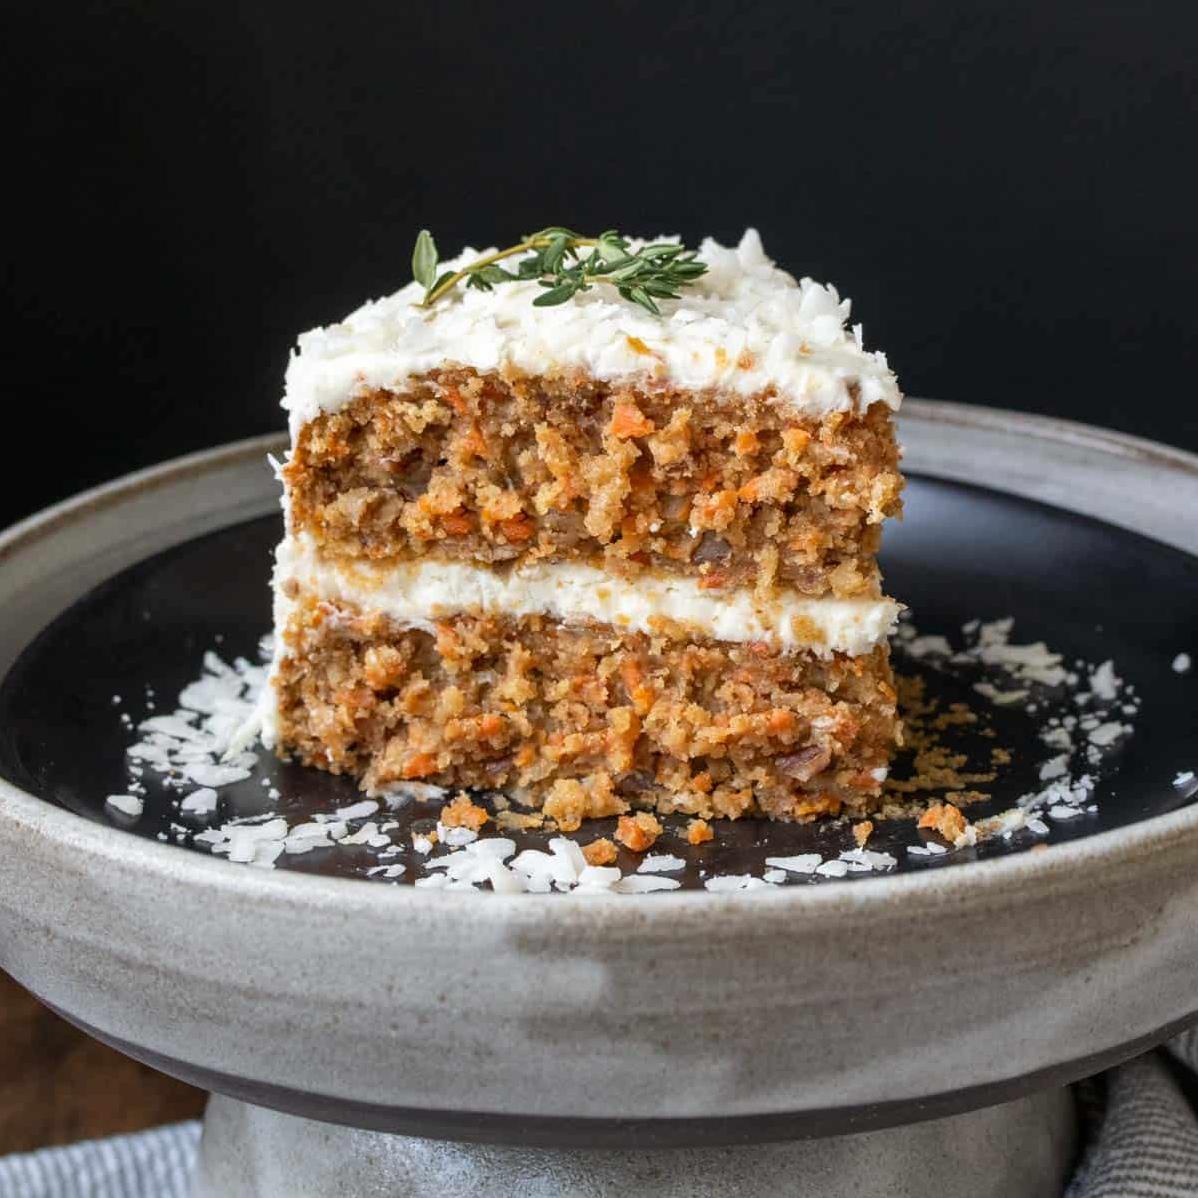  Your taste buds will be singing with each bite of this gluten-free, sugar-free carrot cake.